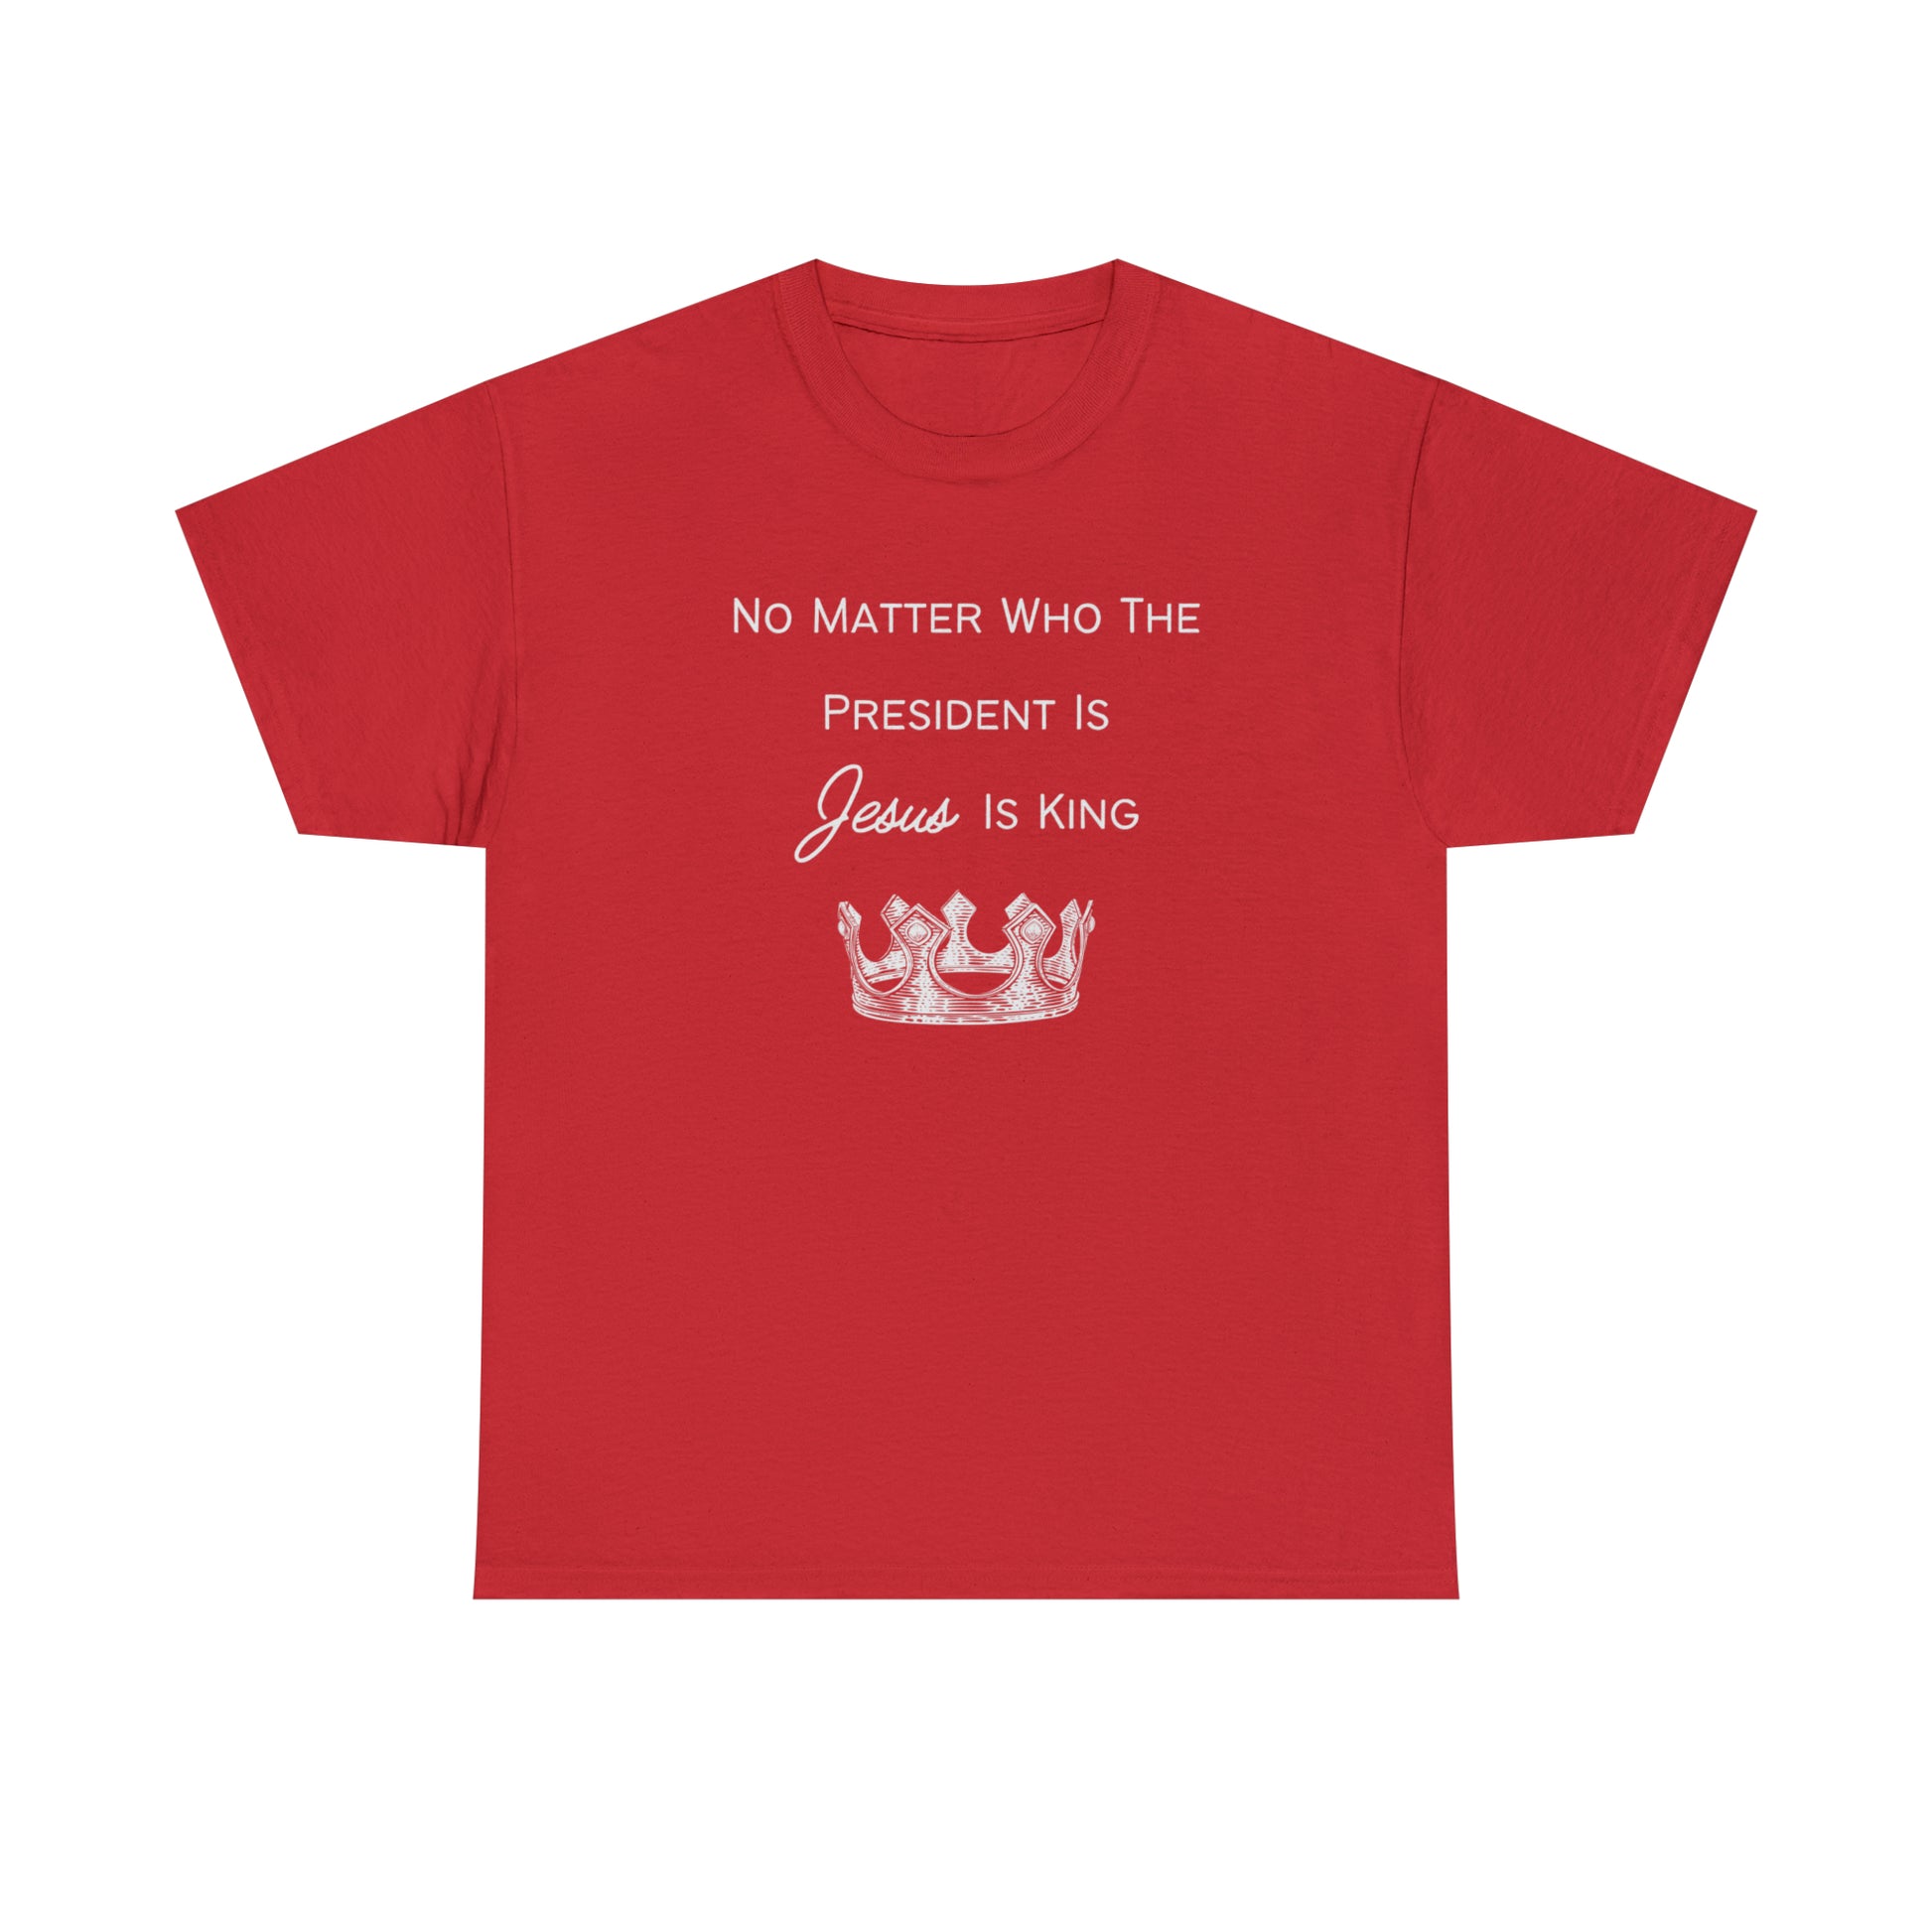 Inspirational "Jesus Is King" t-shirt as a testament of faith